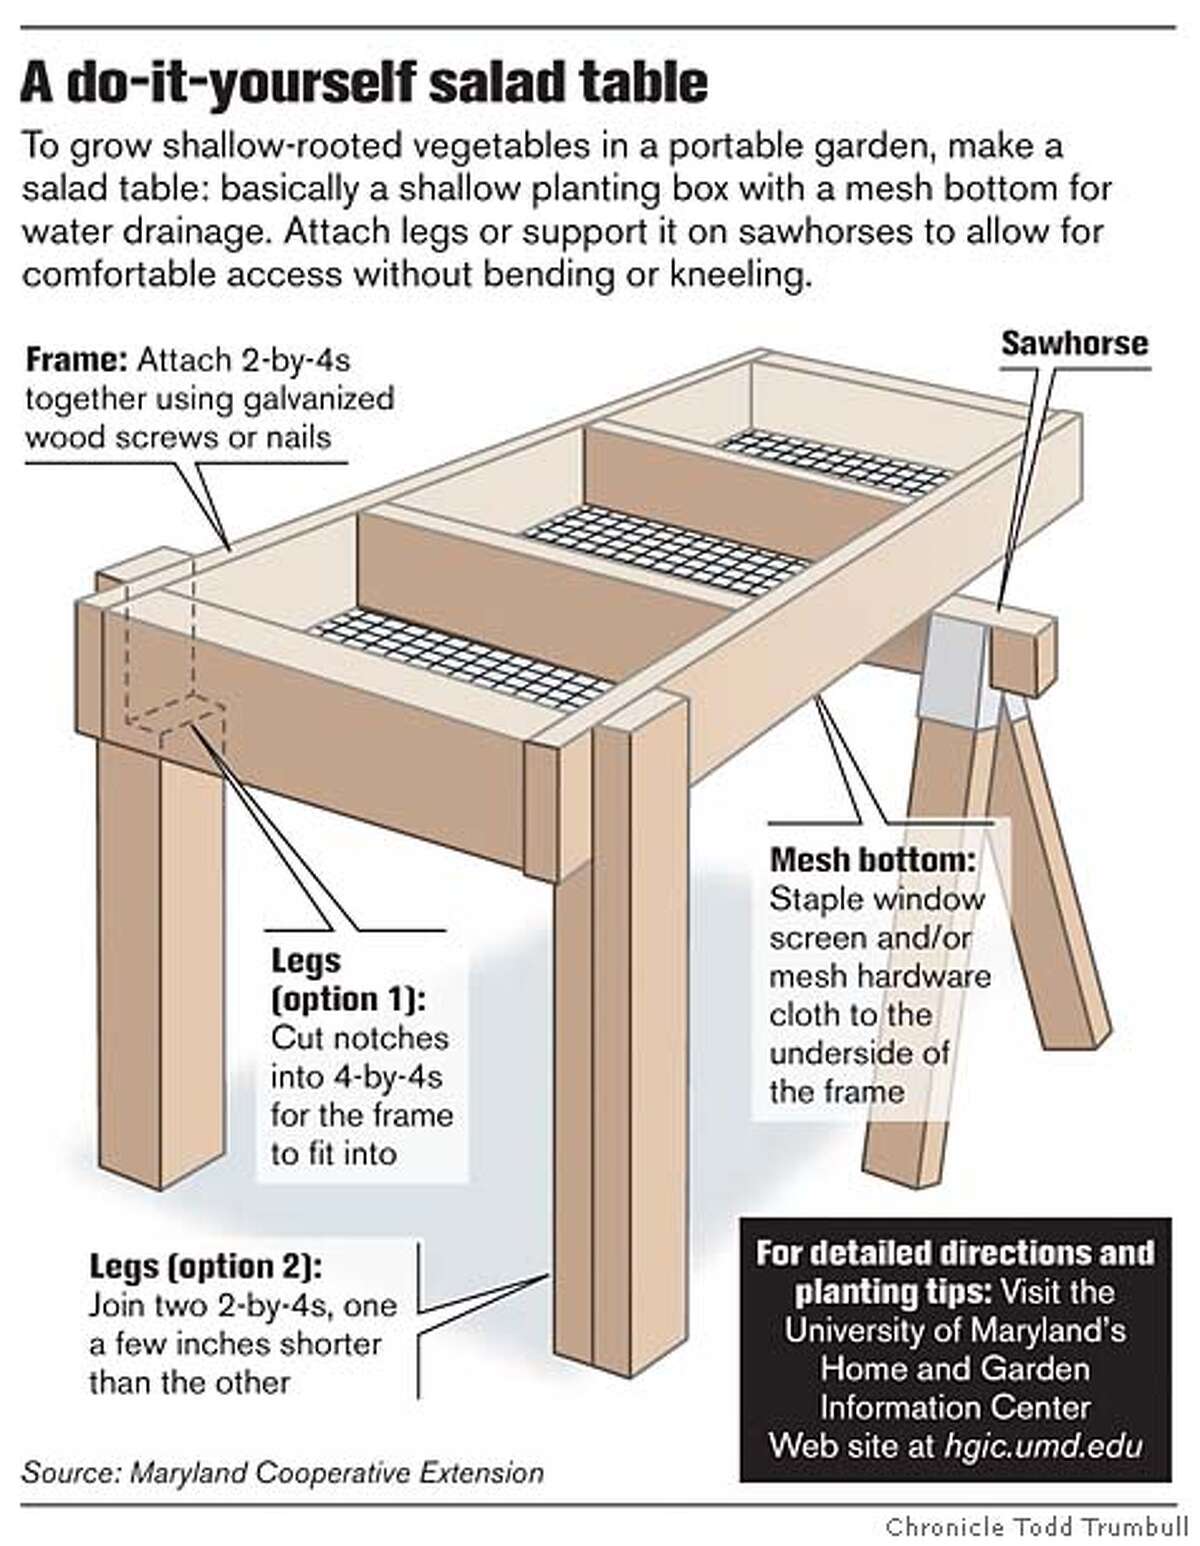 A do-it-yourself salad table. Chronicle graphic by Todd Trumbull